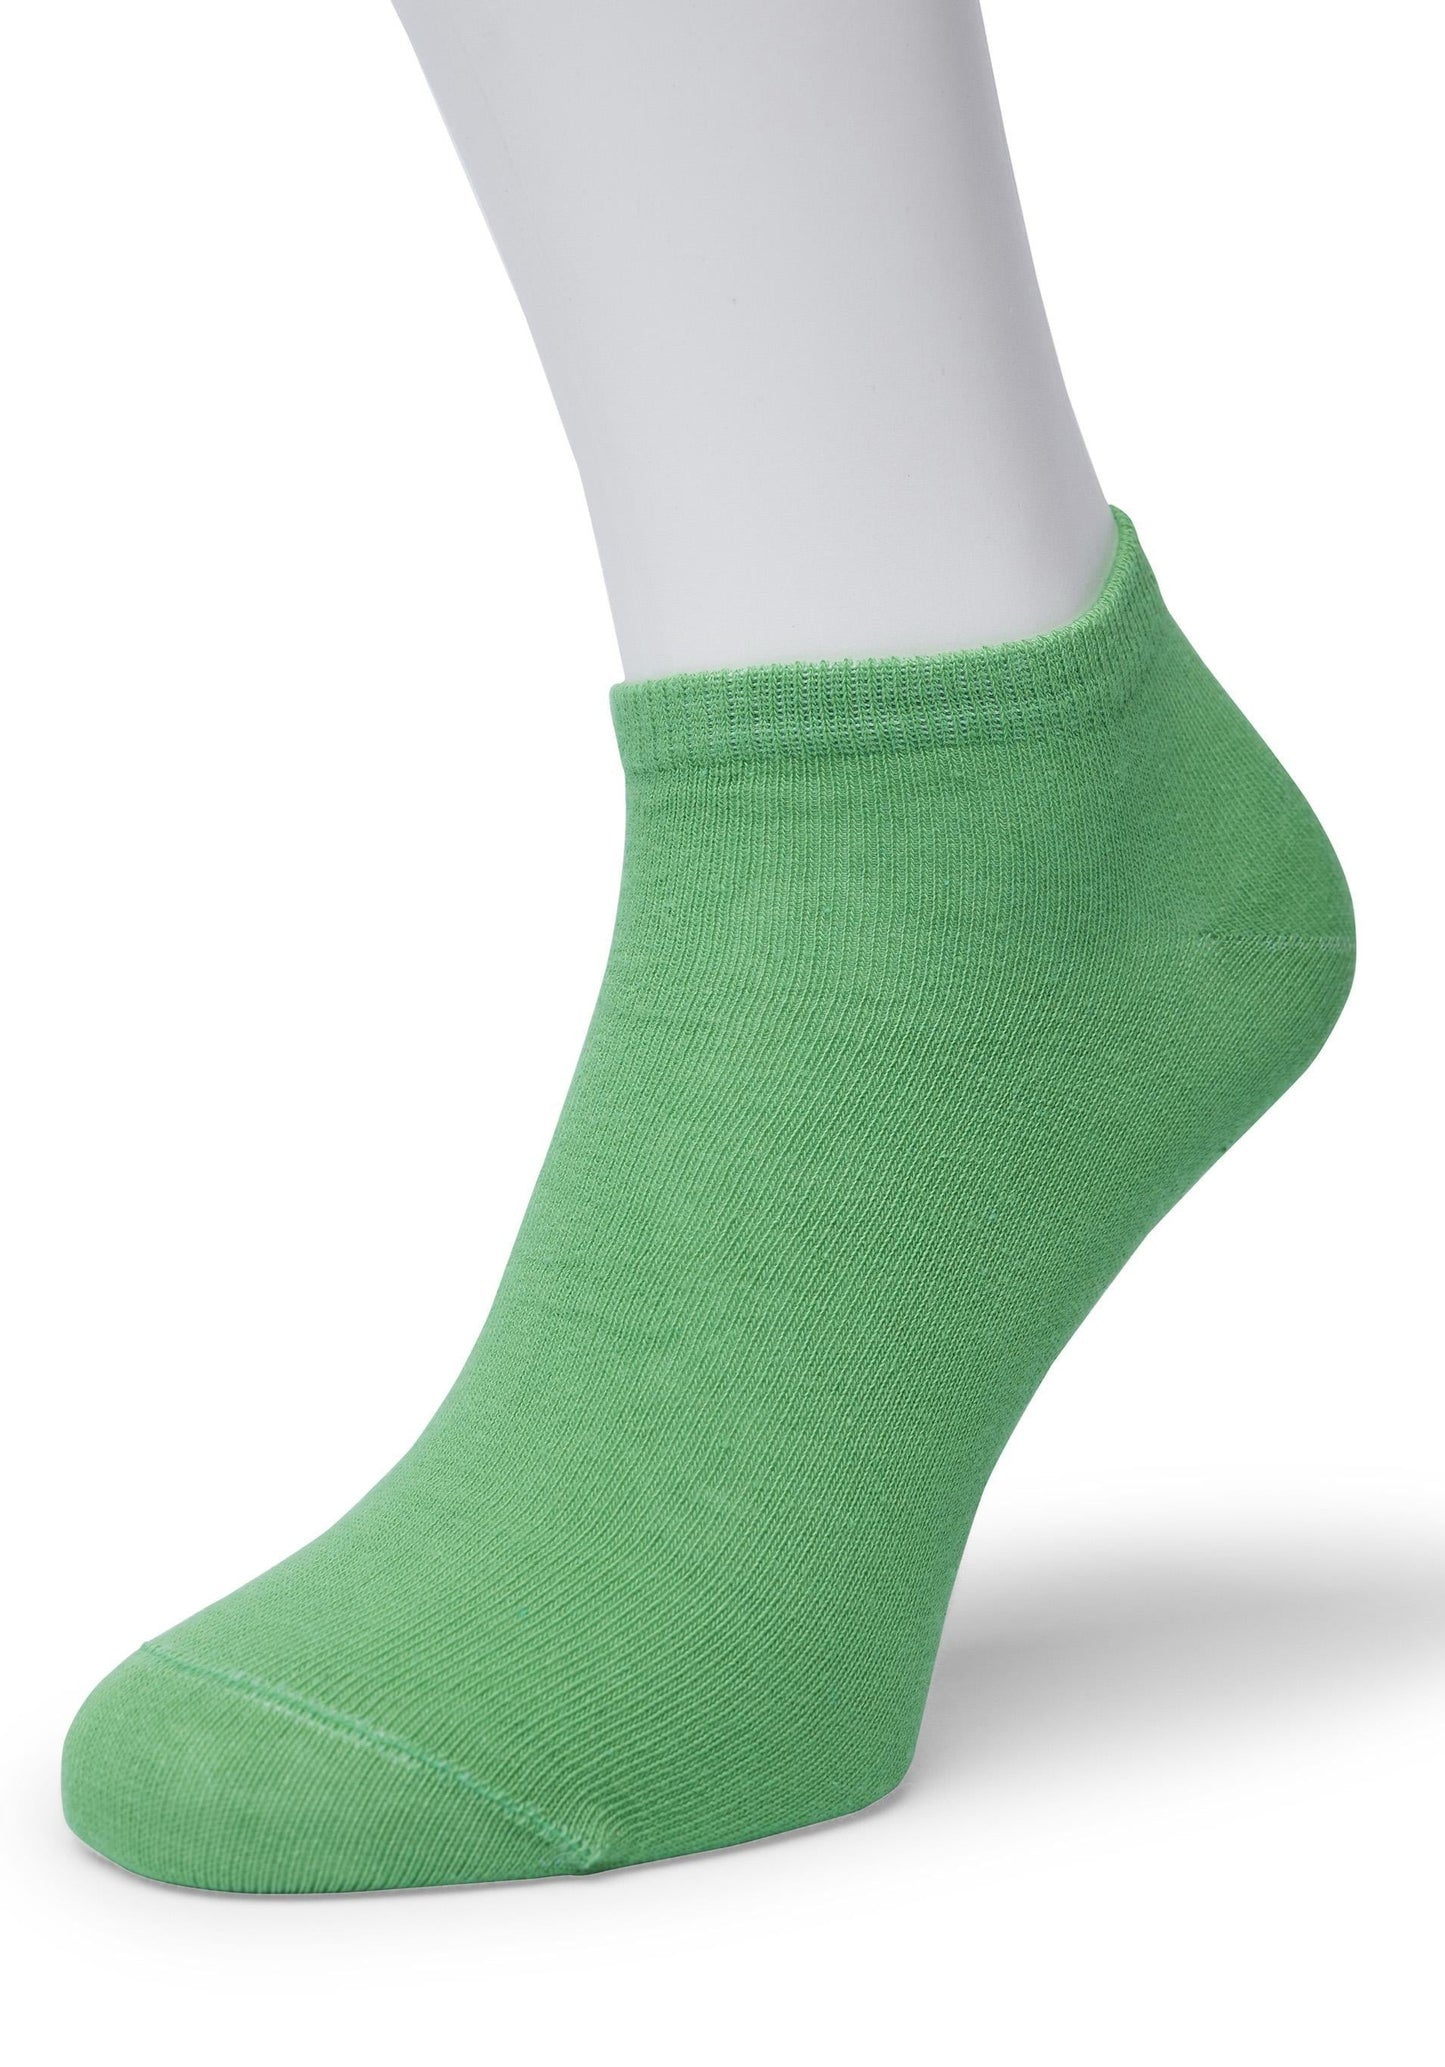 Bonnie Doon BD811001 Cotton Short Ankle Sock - Bright green (summer) Low rise cotton mix socks with flat toe seam and plain elasticated cuff. 